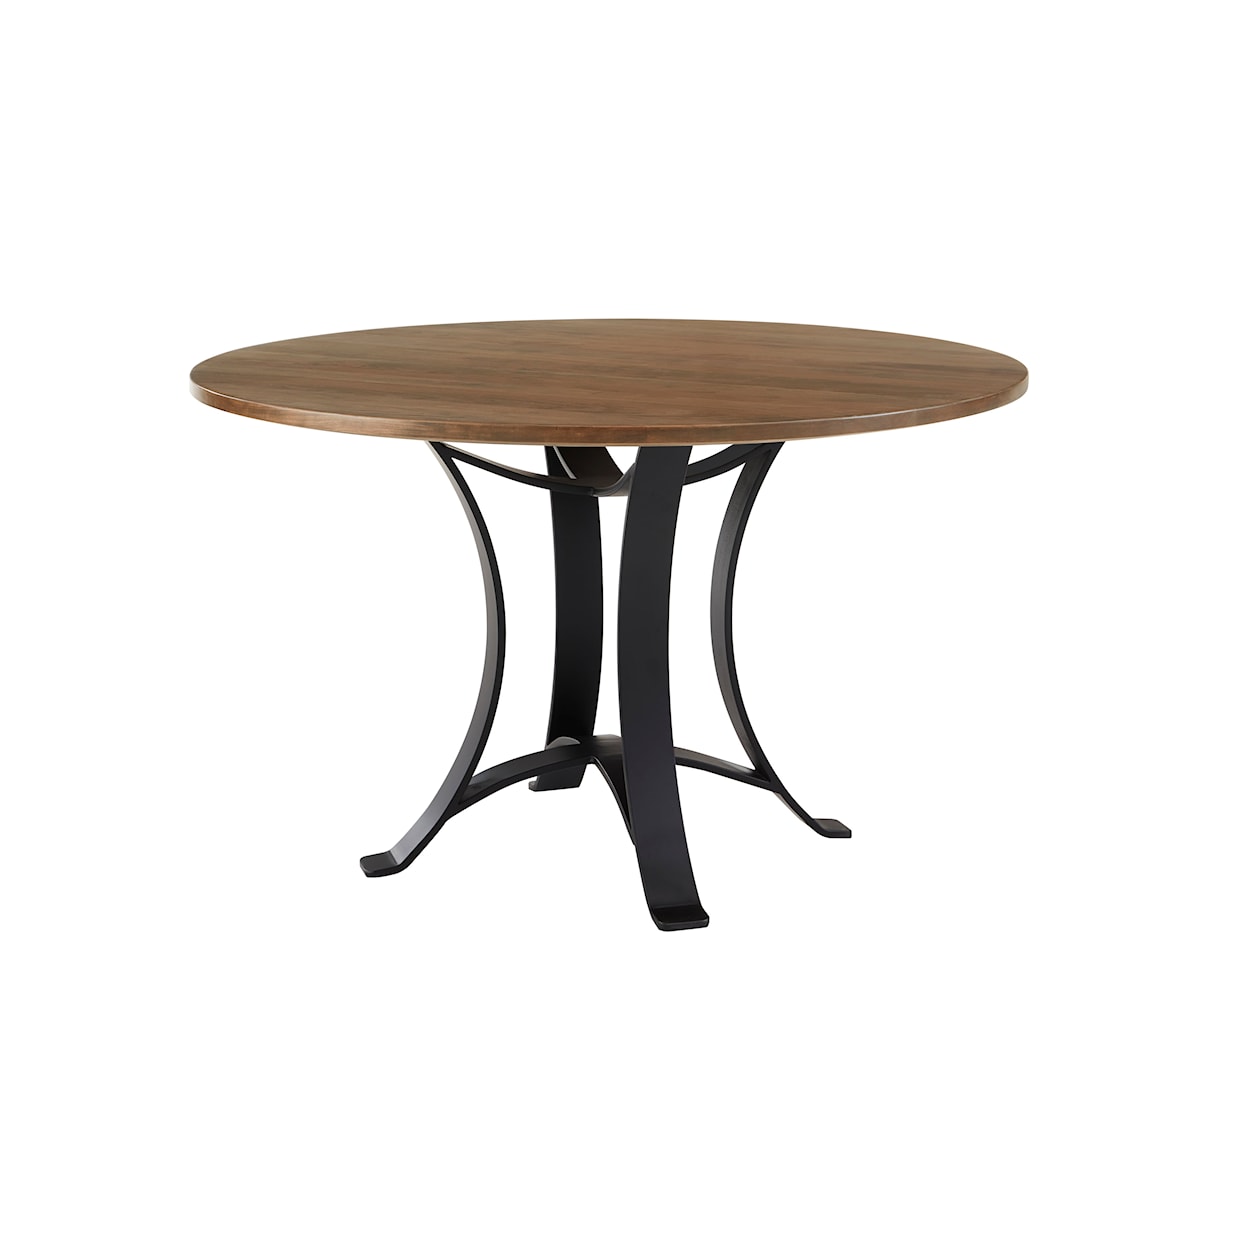 Virginia House Crafted Cherry - Medium 48" Round Dining Table